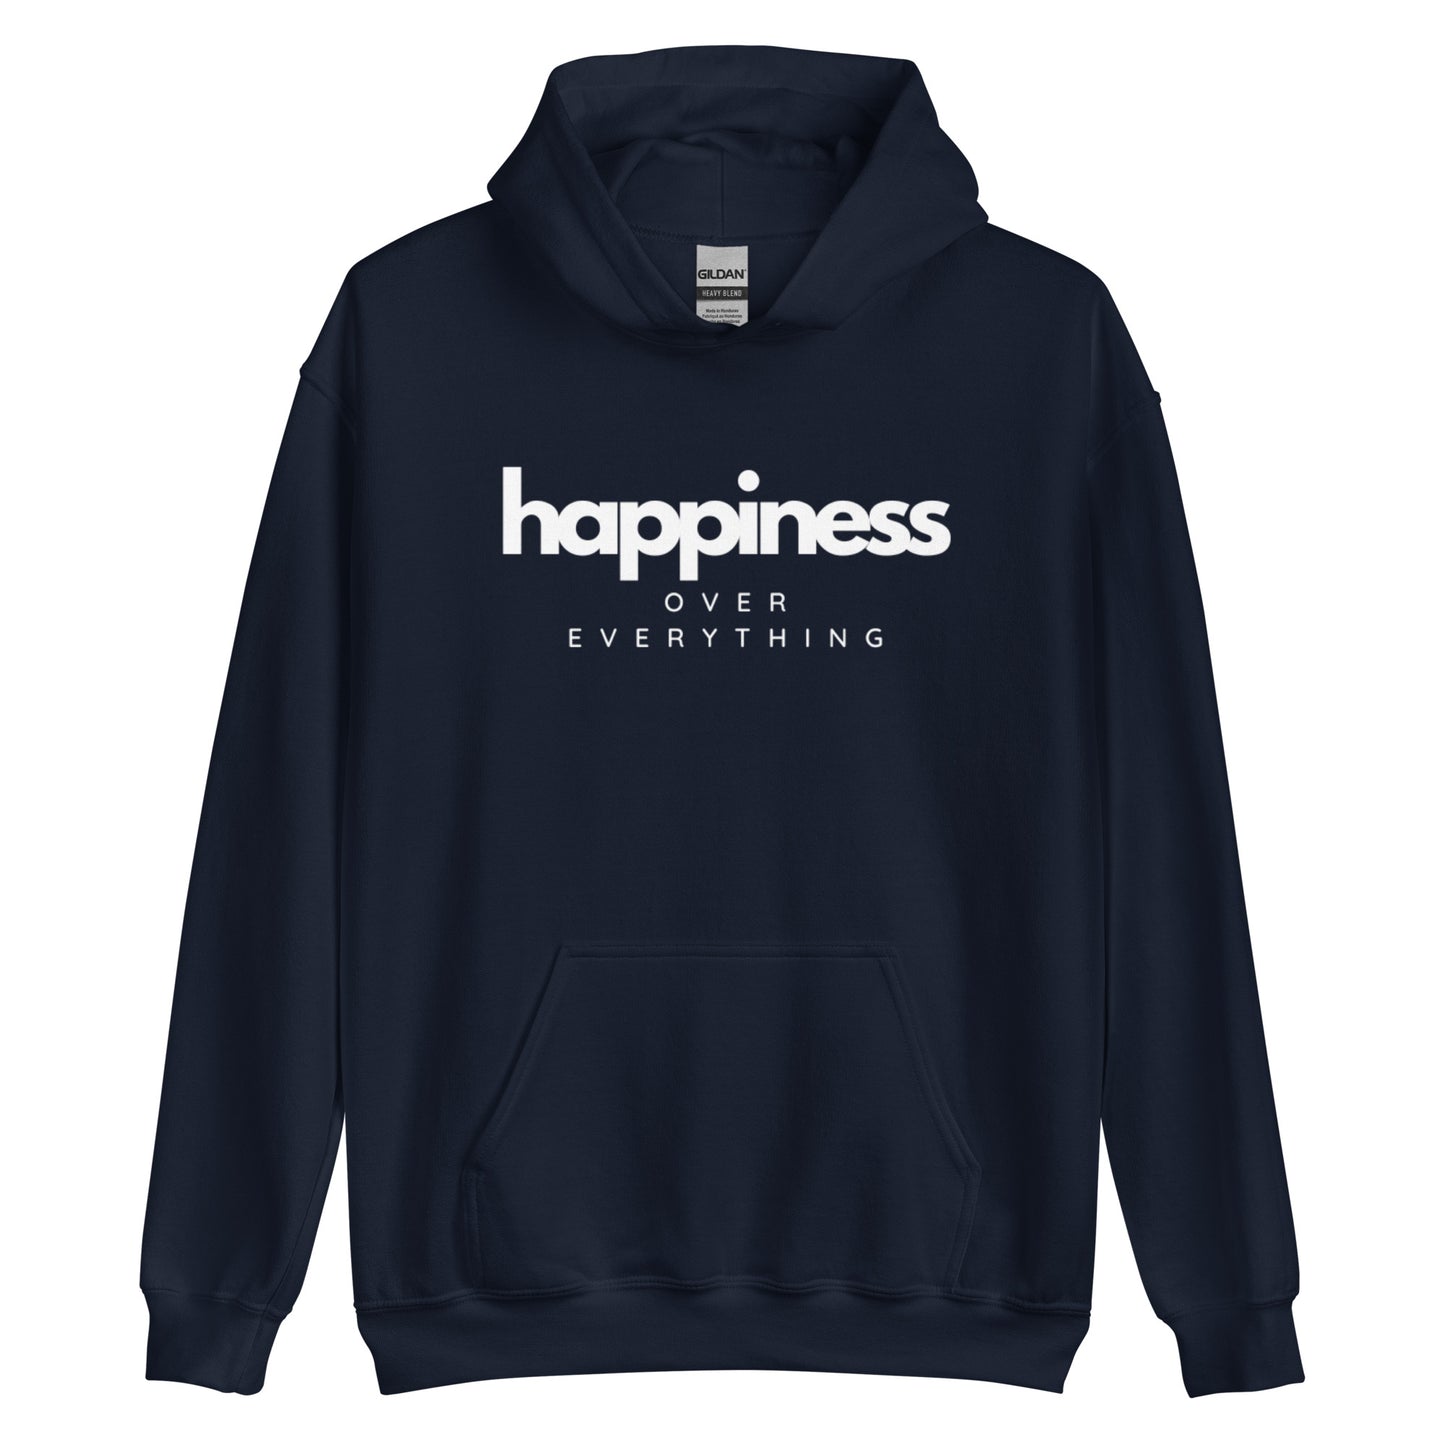 Happiness Over Everything Unisex Hoodie